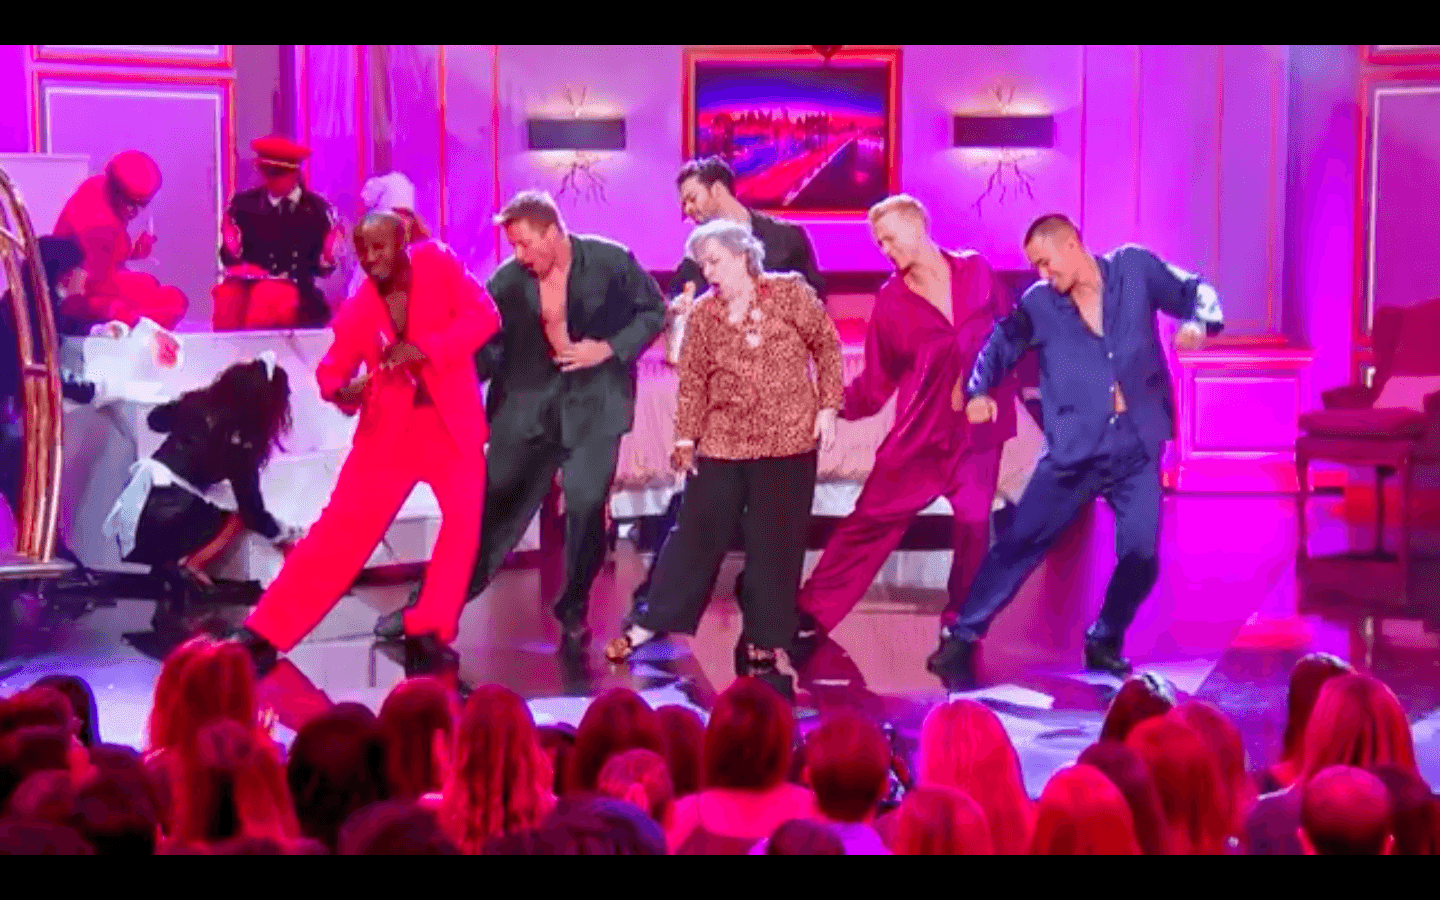 The 70-year-old Bates impresses with her dance moves. Image credit: Facebook/Lip Sync Battle.